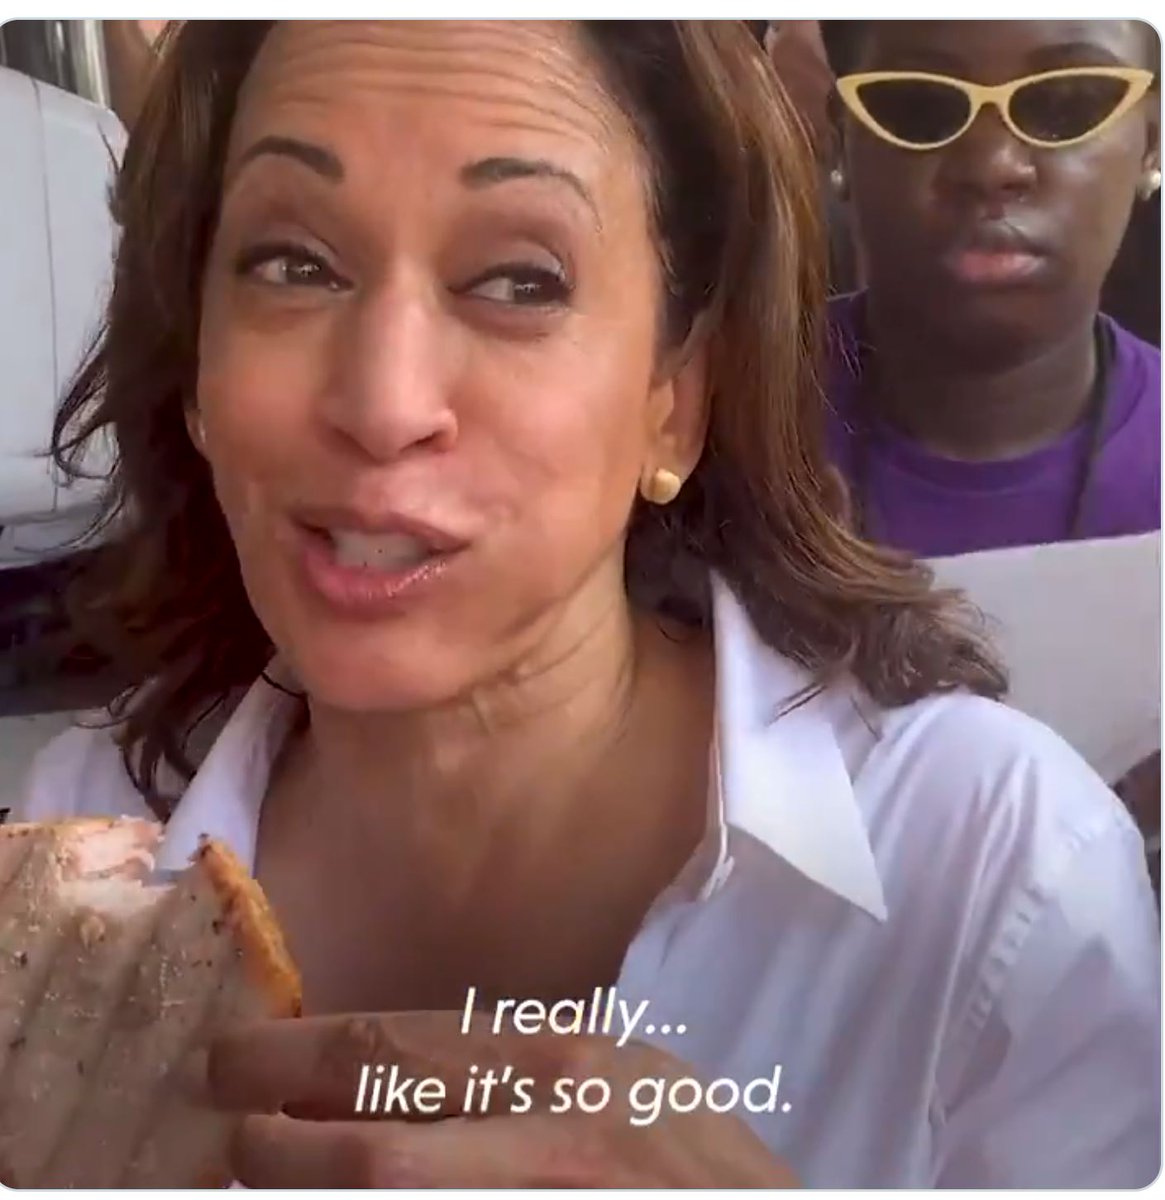 Kamala Harris: If elected, I'll have government control what you eat